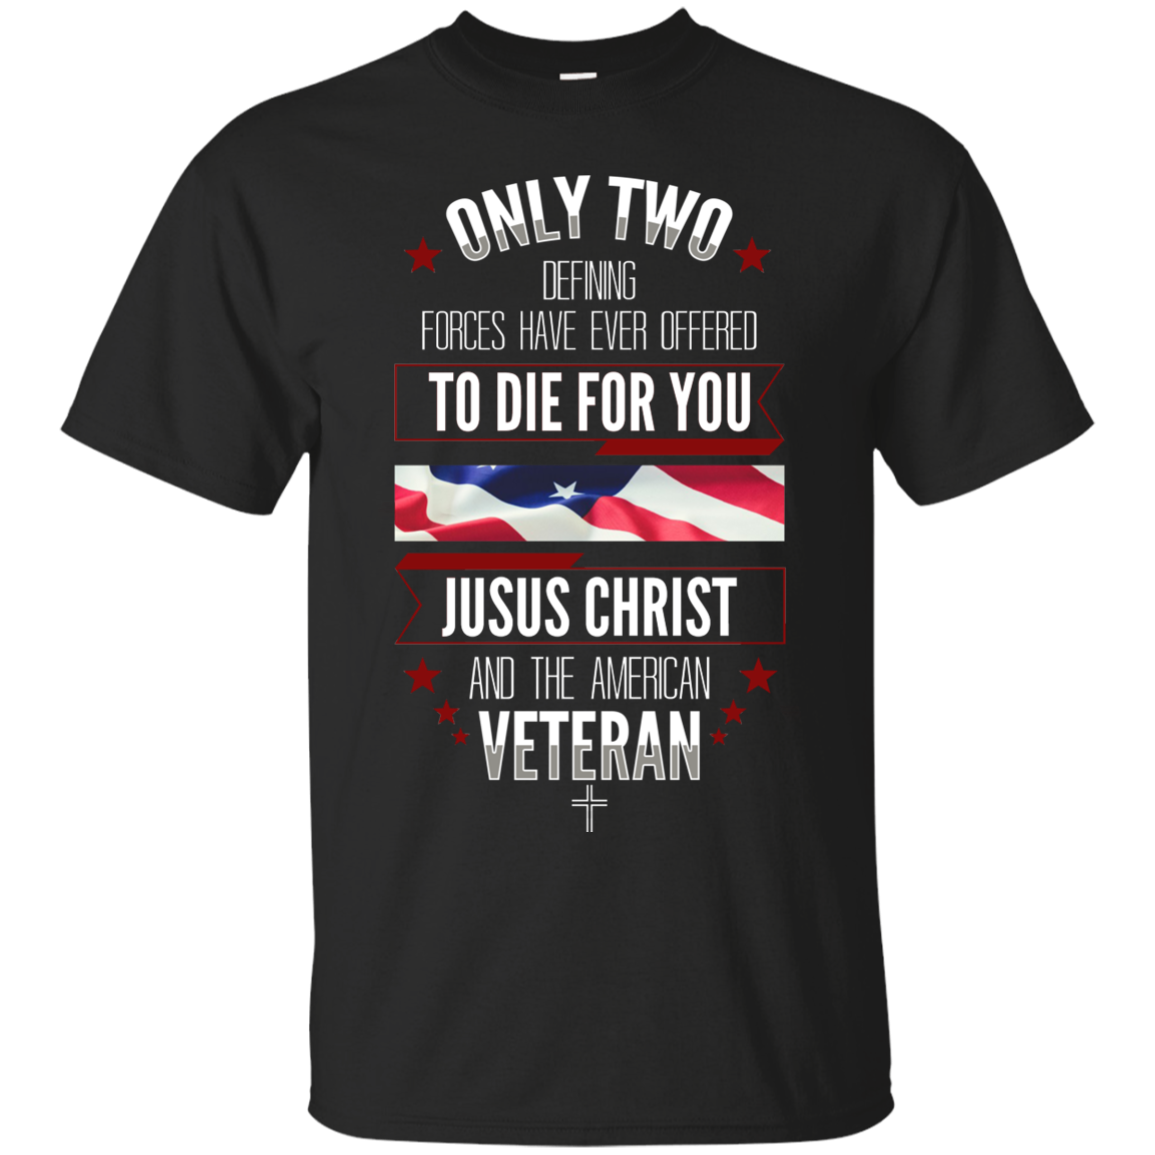 Only two defining forces have ever offered to die for you shirt, hoodie, tank